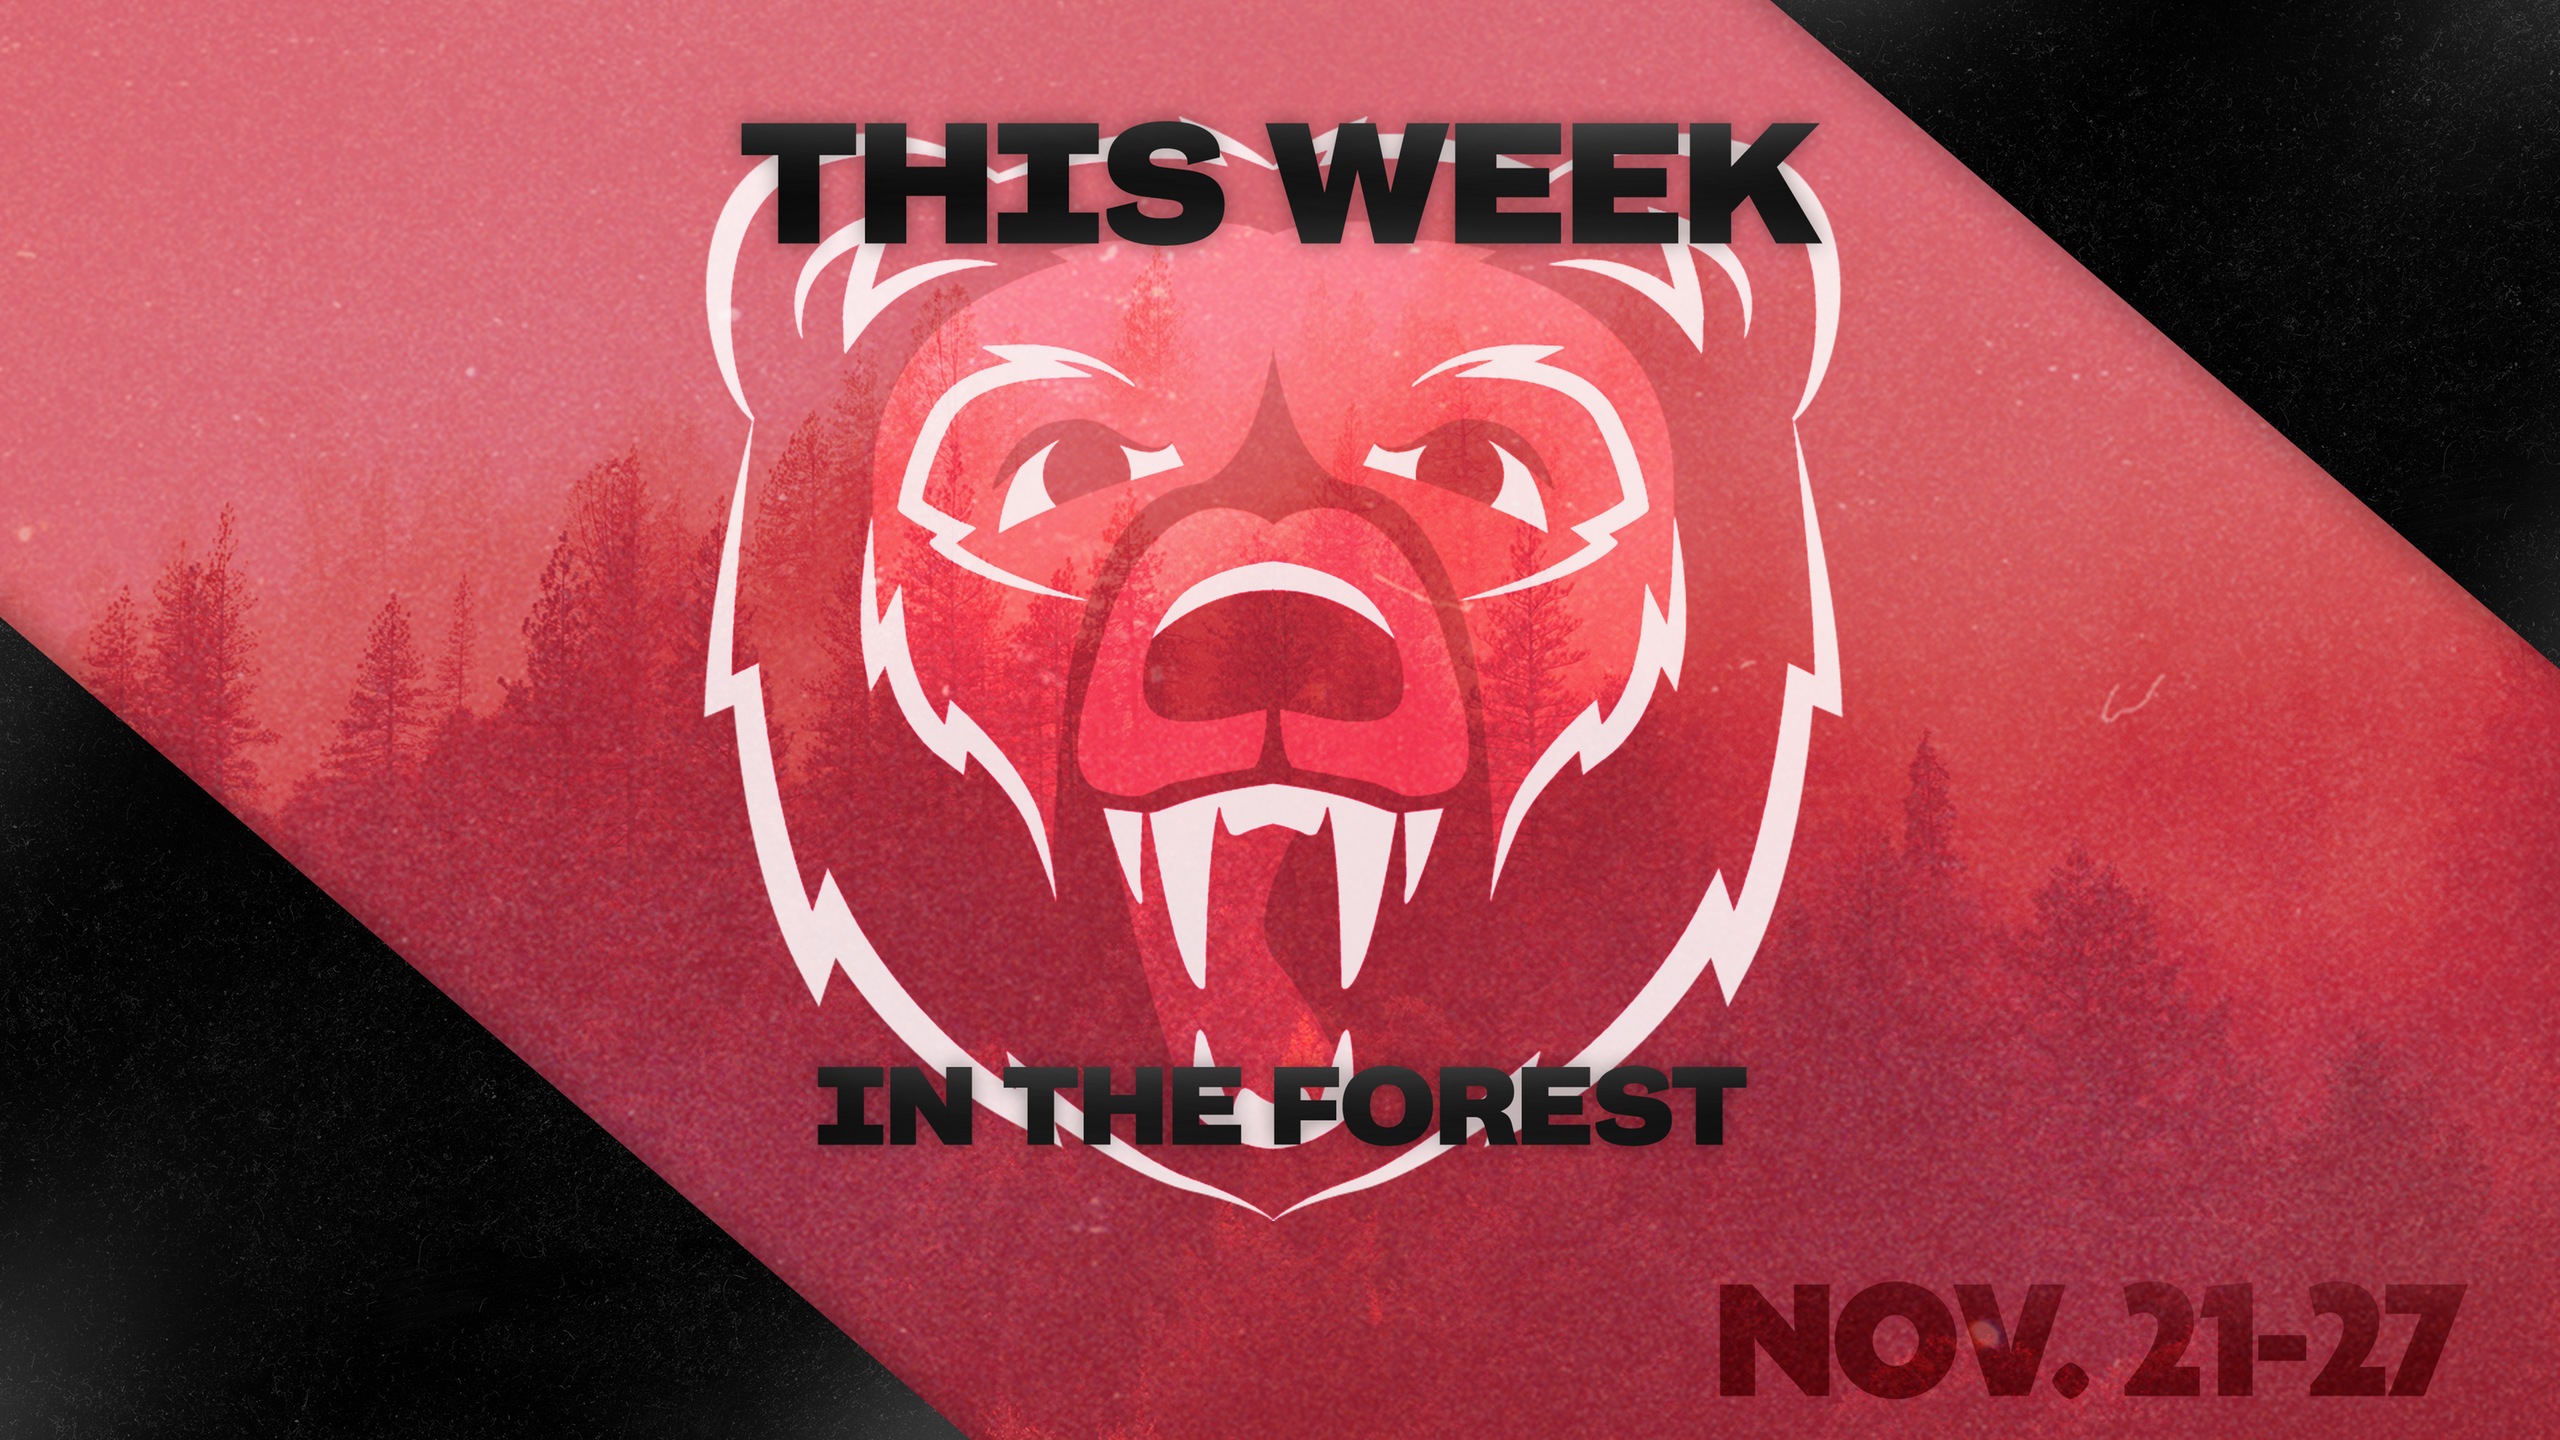 This Week in The Forest: Nov. 21-27